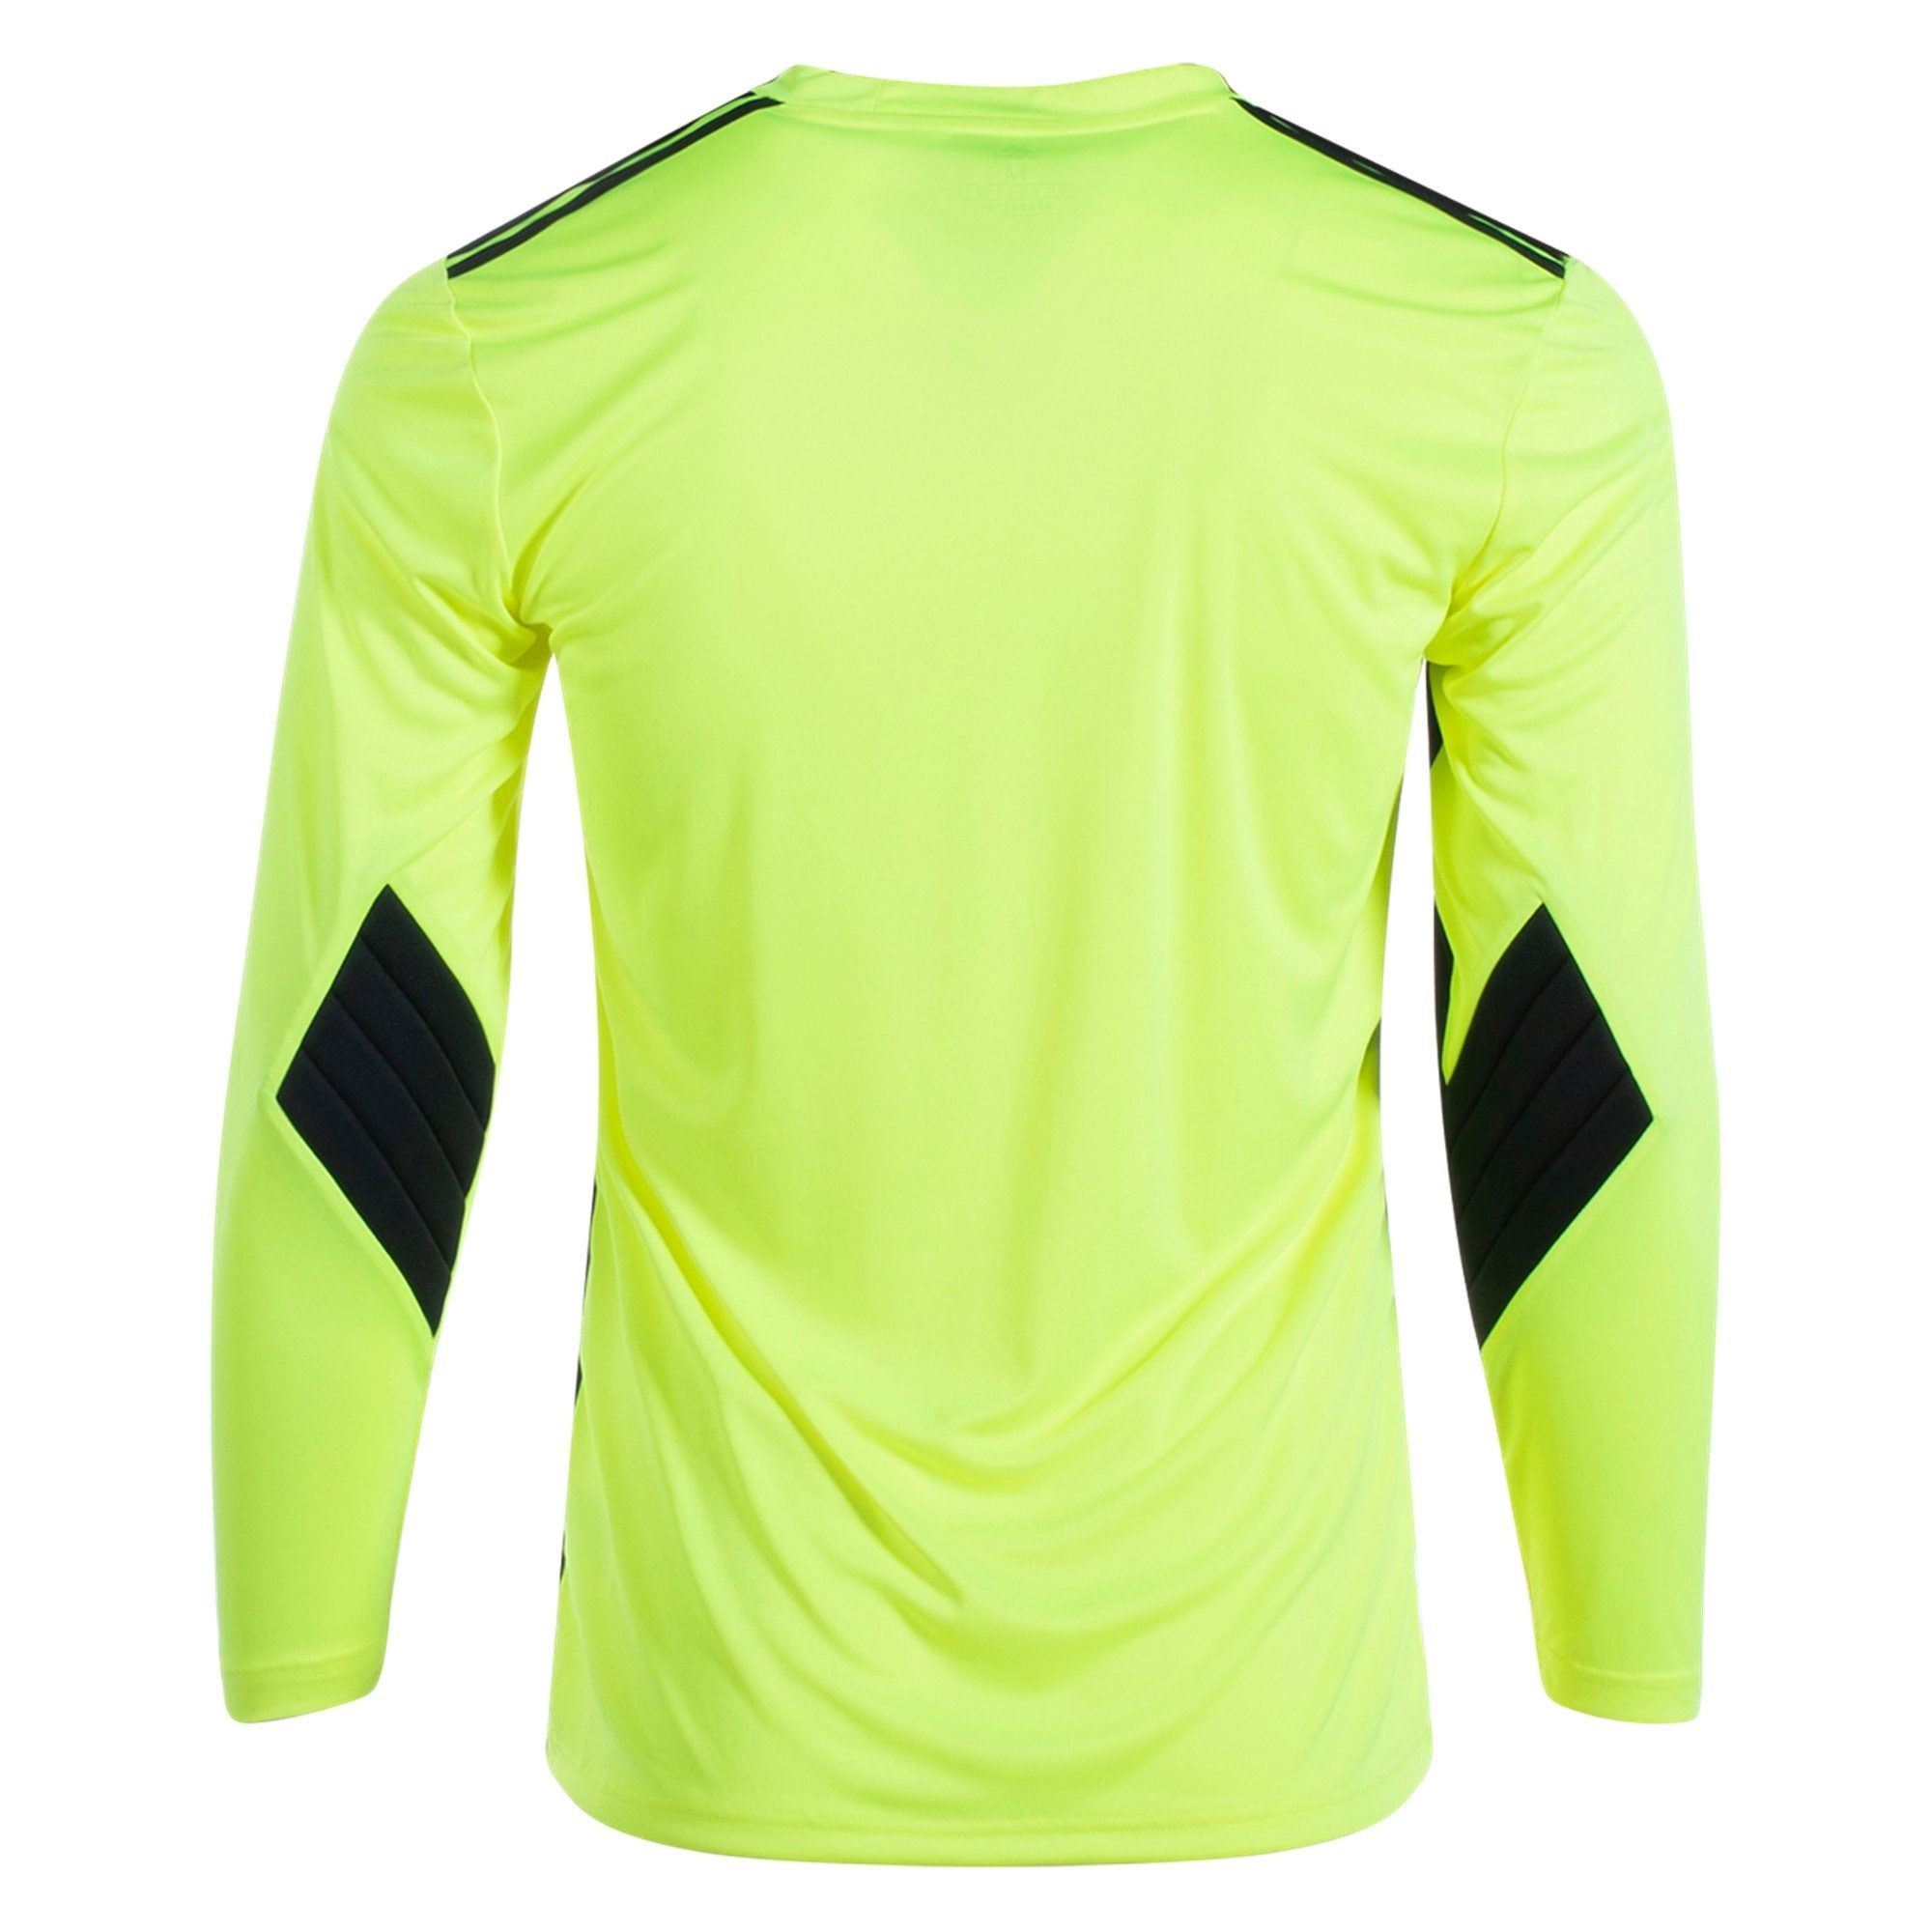 Adidas LA Galaxy Goalkeeper Jersey - Men, Best Price and Reviews